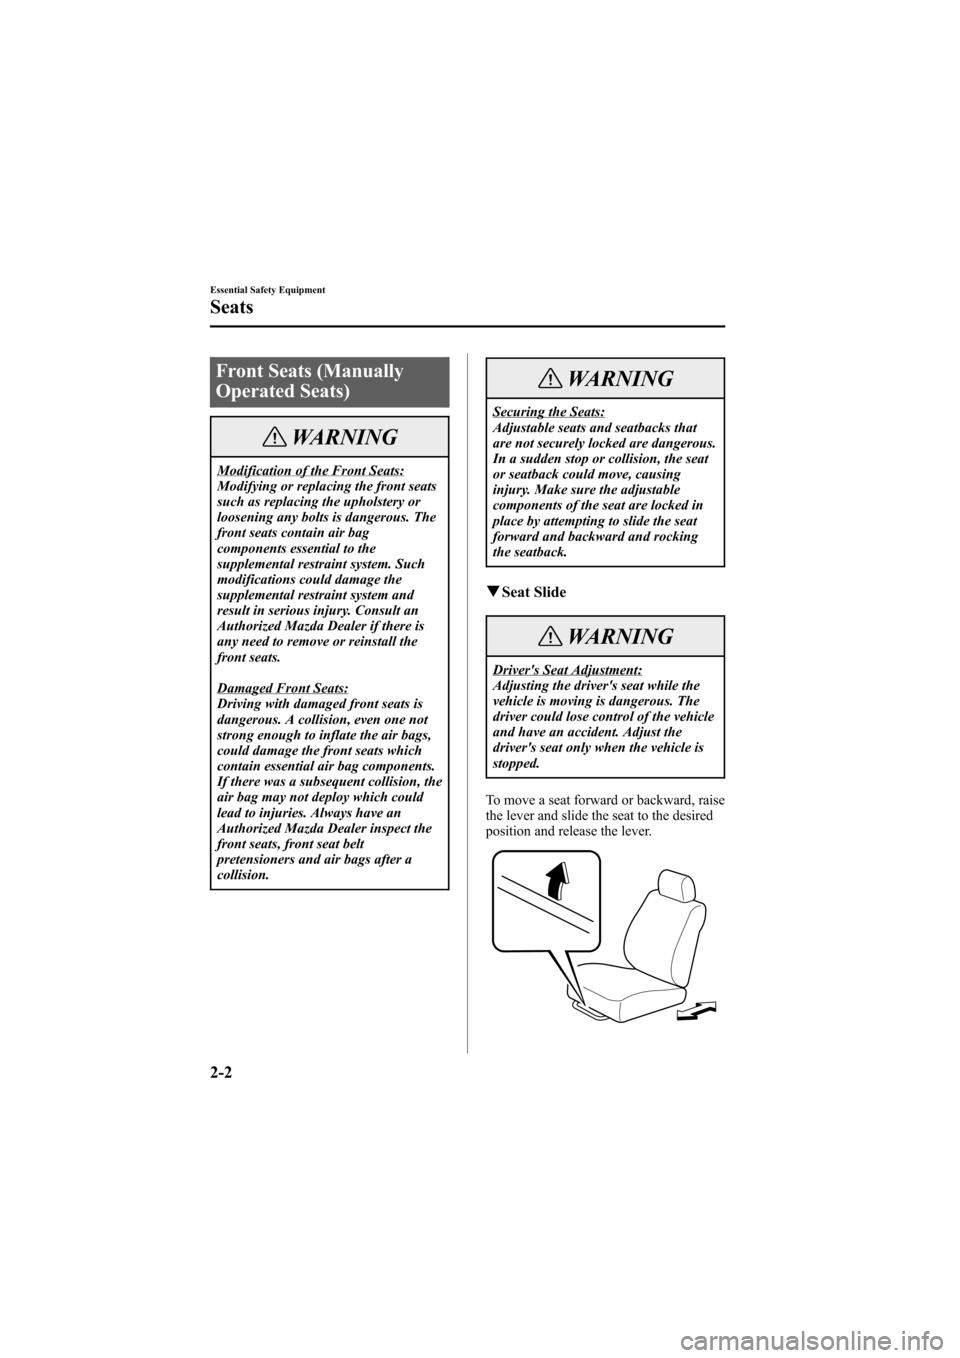 MAZDA MODEL 6 2005  Owners Manual (in English) Black plate (16,1)
Front Seats (Manually
Operated Seats)
WARNING
Modification of the Front Seats:
Modifying or replacing the front seats
such as replacing the upholstery or
loosening any bolts is dang